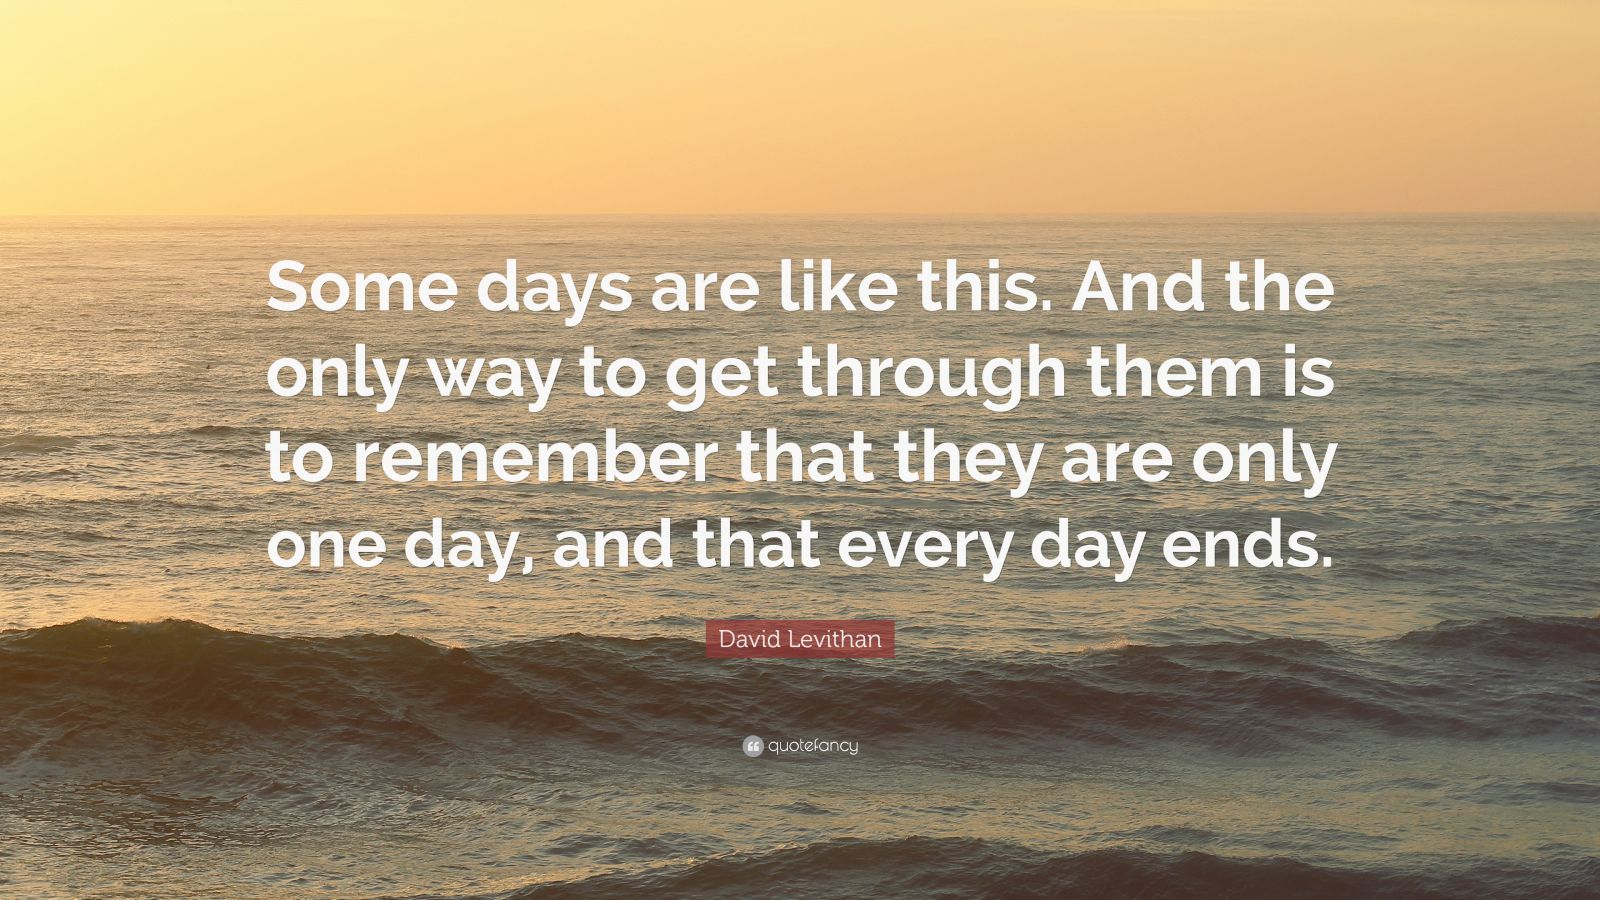 David Levithan Quote: “Some days are like this. And the only way to get ...